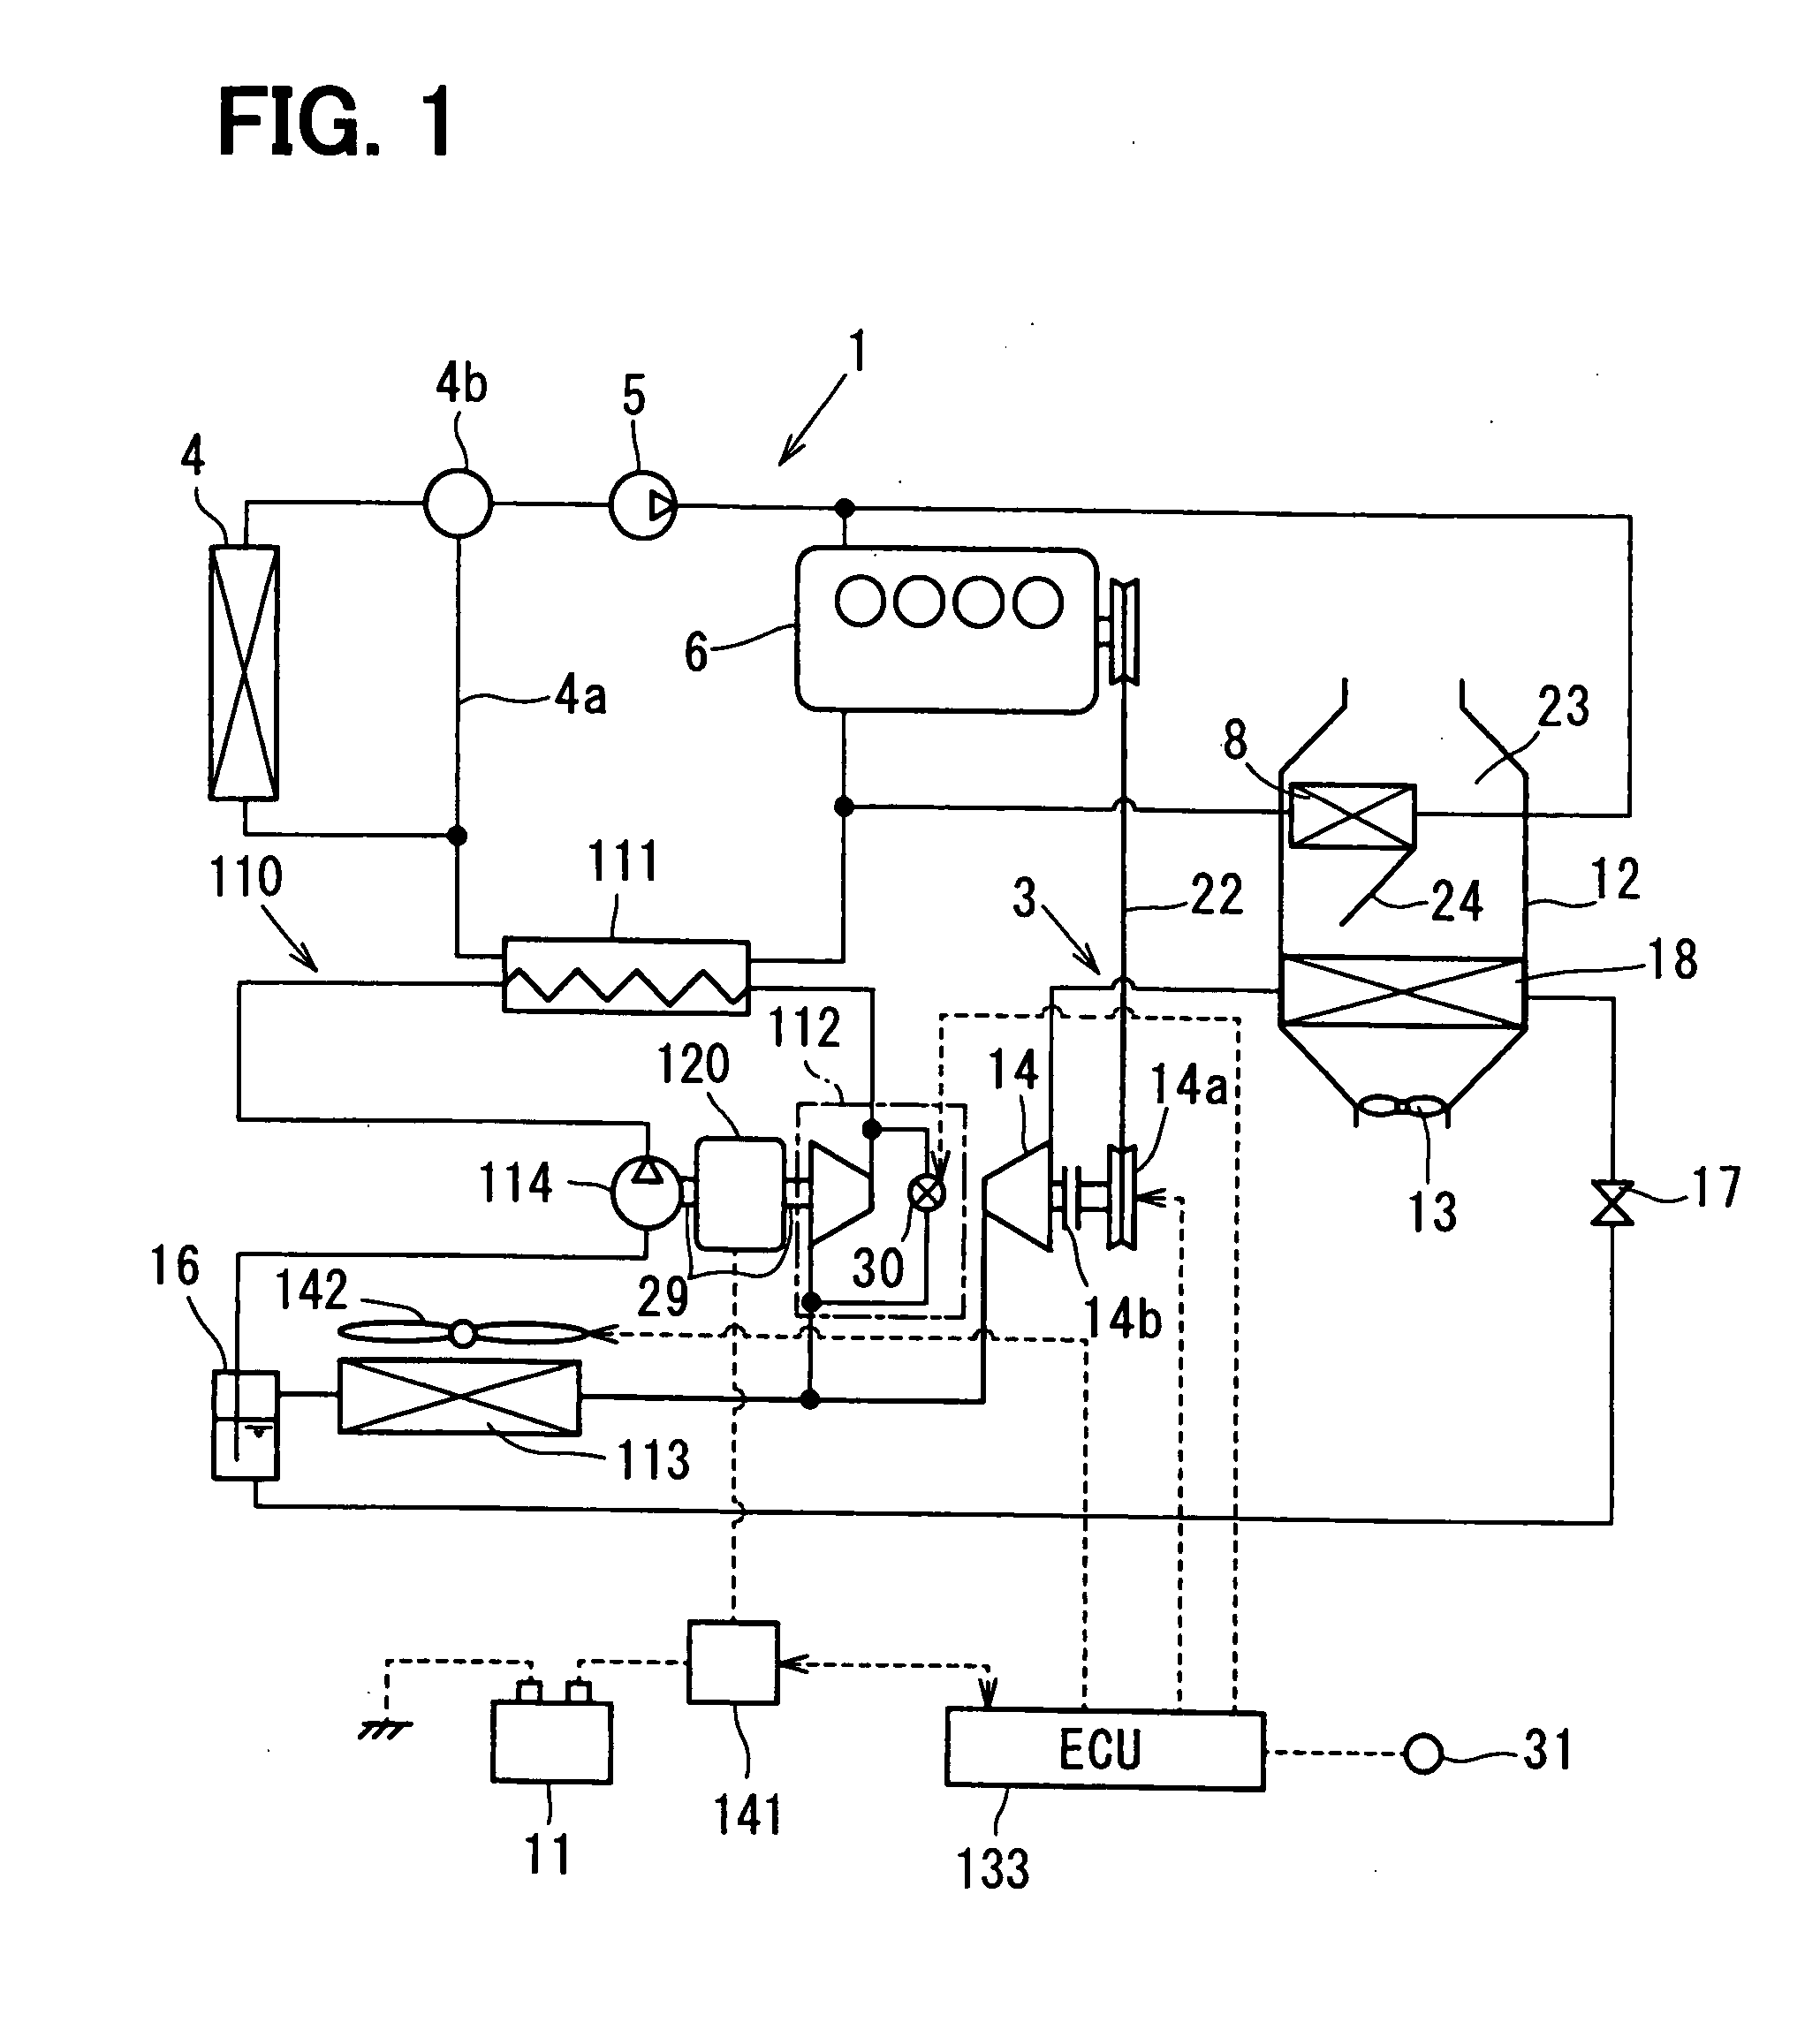 Waste heat collecting system having expansion device